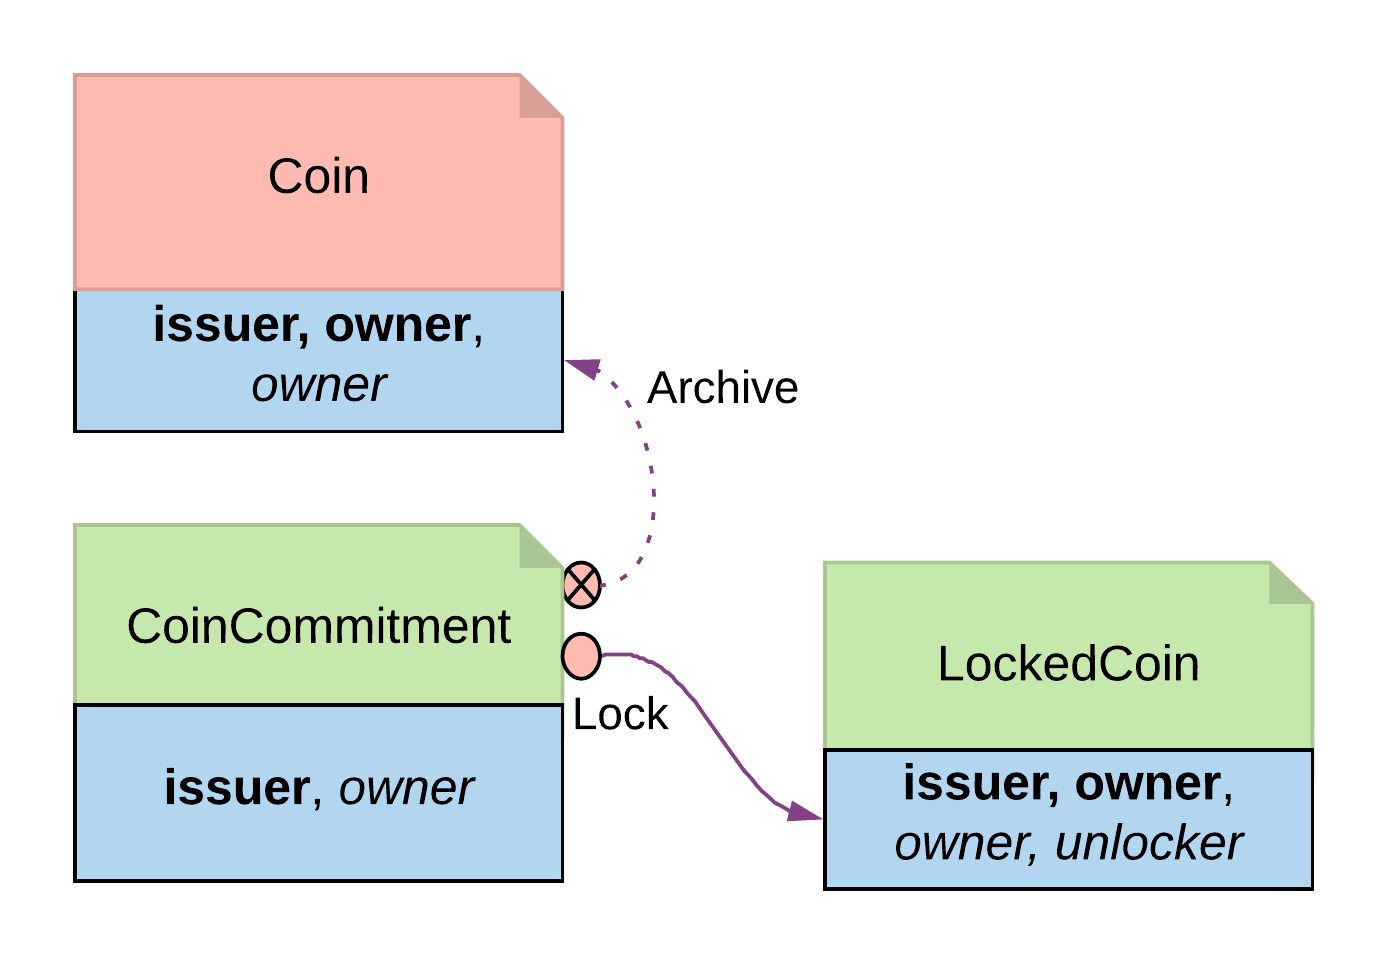 Locking by Archiving Contract uses the CoinCommitment contract to archive Coin and create LockedCoin